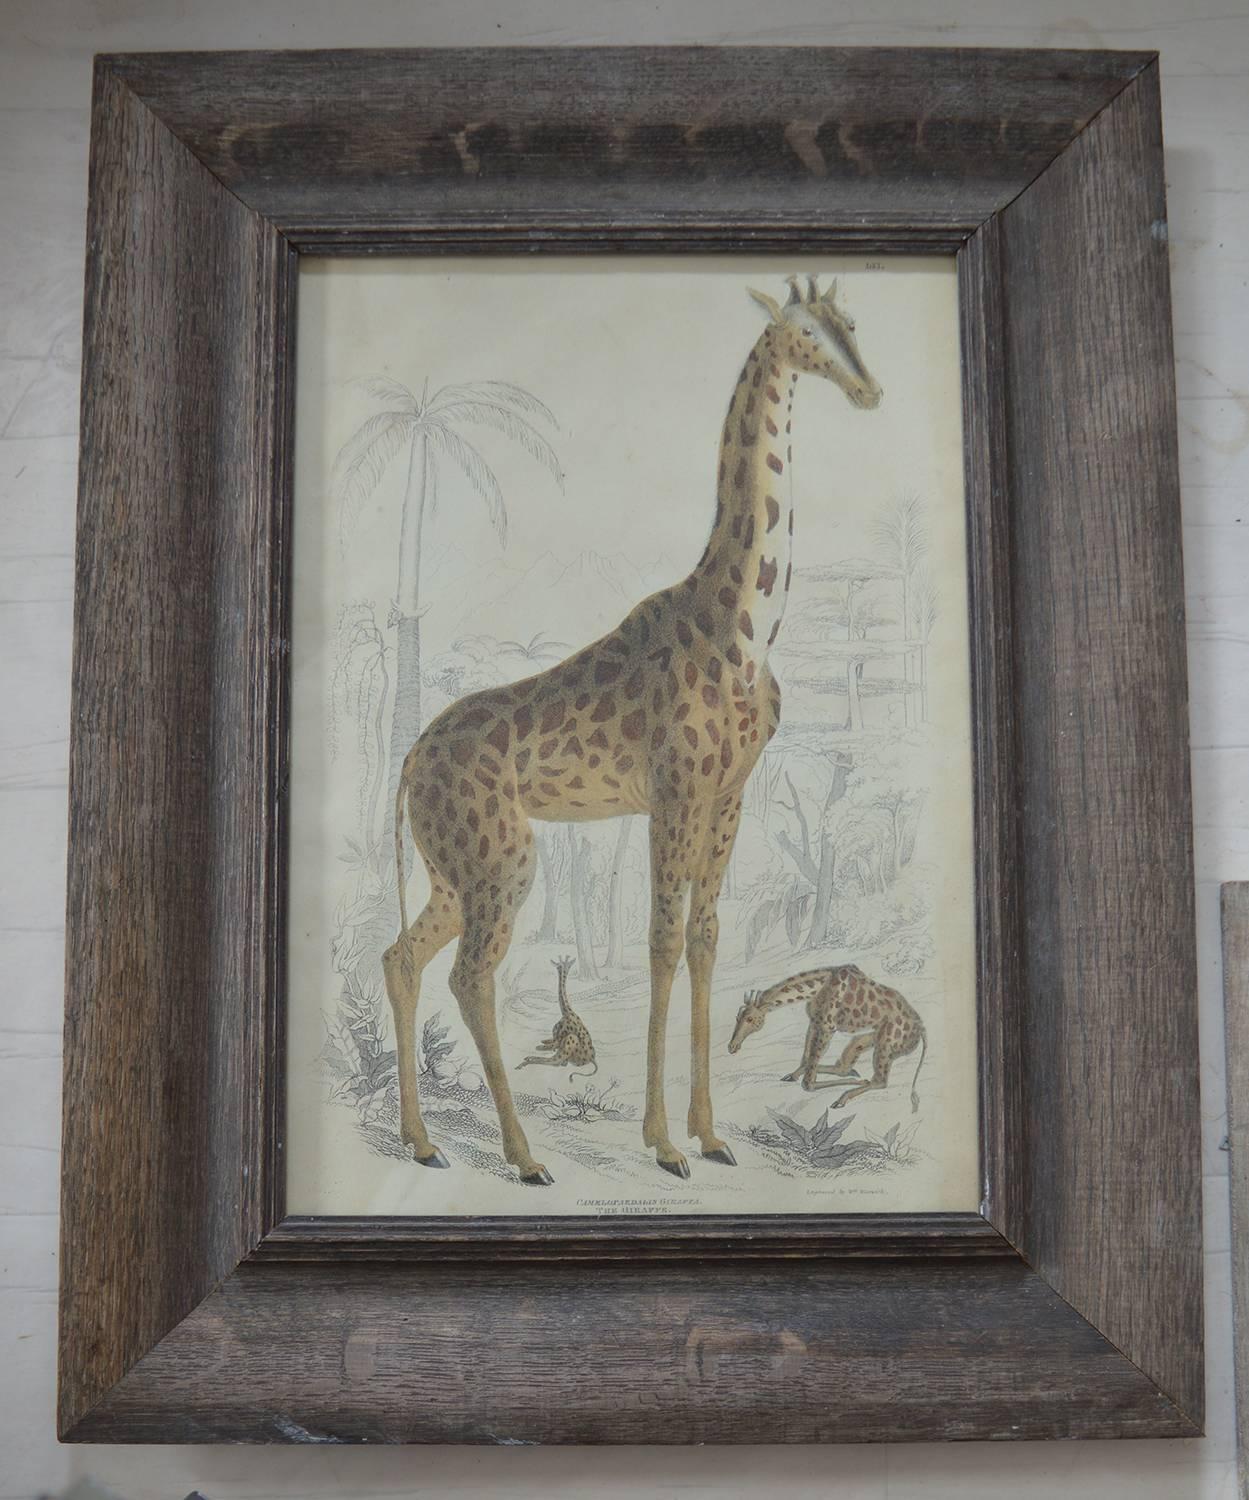 Great image of a giraffe.

Hand colored lithograph by Warwick.

After the original drawing by Captain Brown.

Original color.

Published by Smith, Elder 1835.

Presented in an antique distressed oak frame.

The measurement given below is